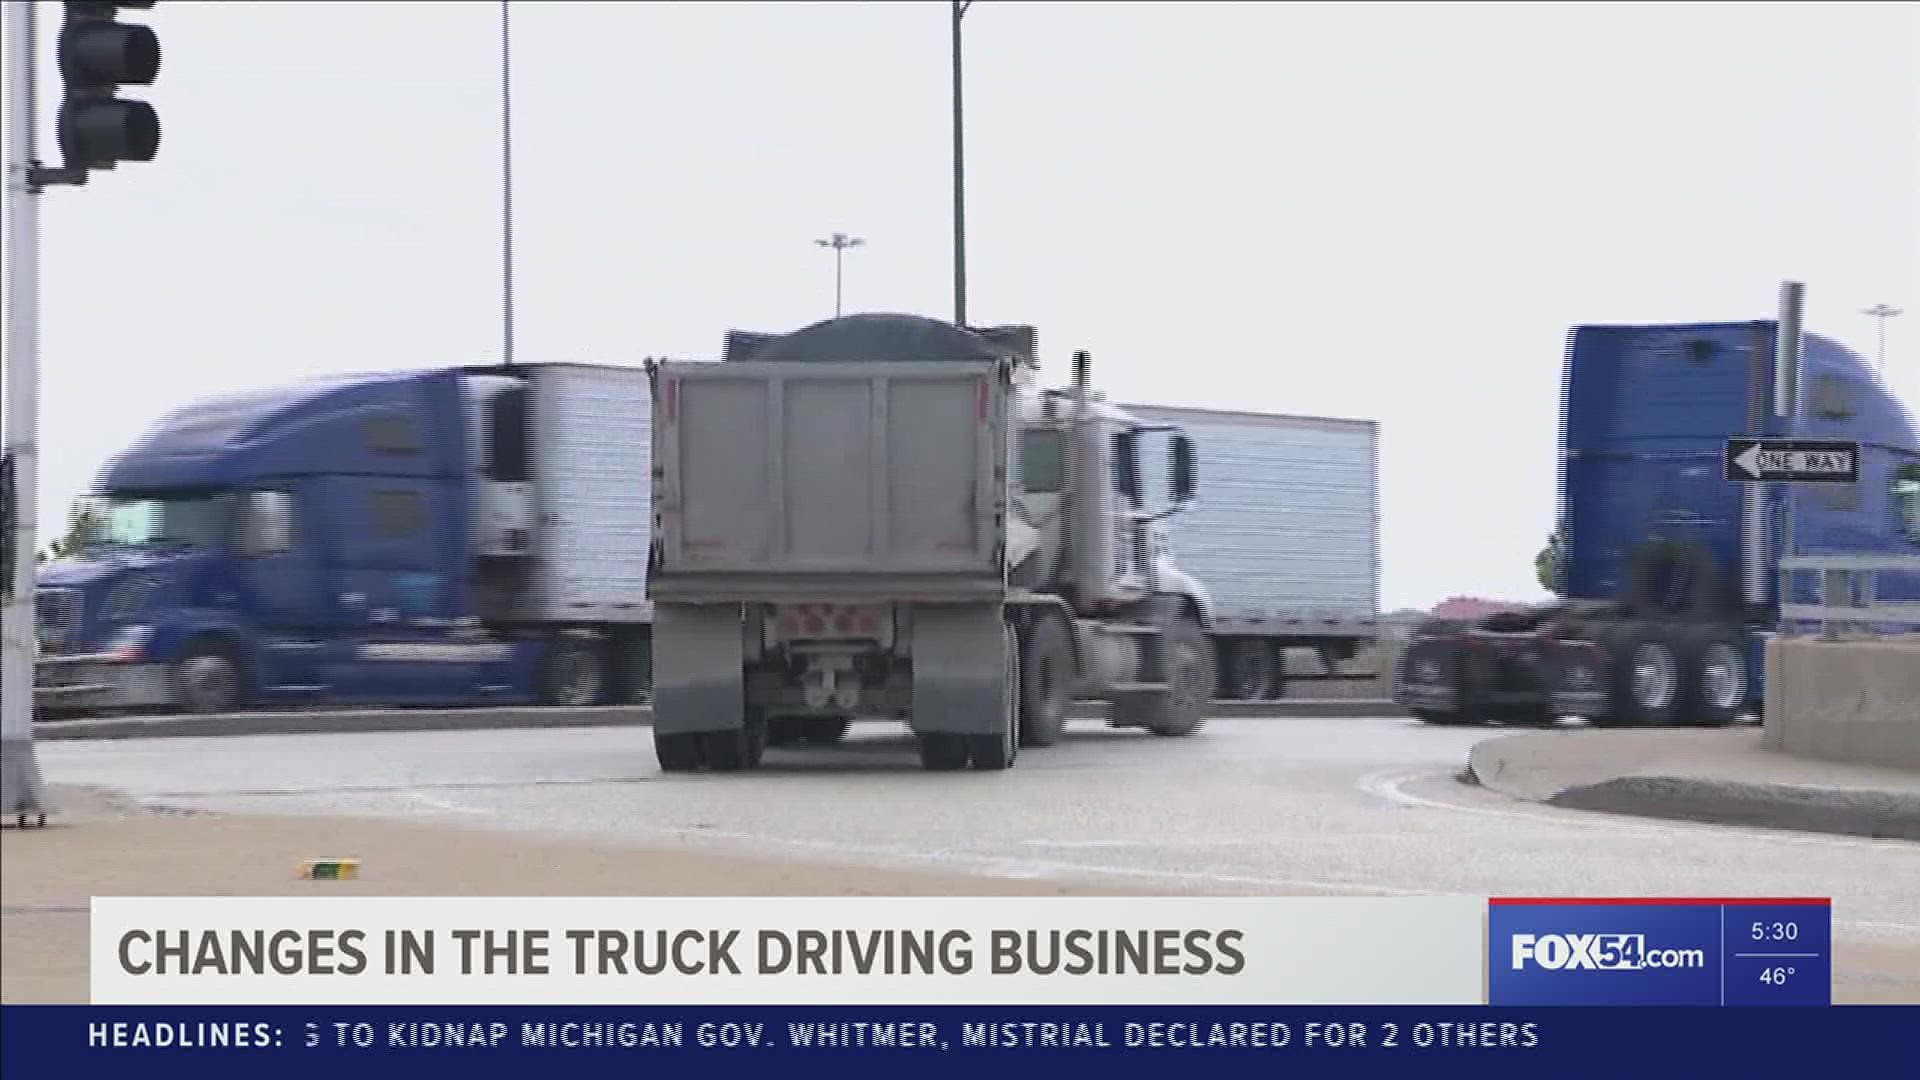 What changes in the truck driving business are affecting long-time drivers?